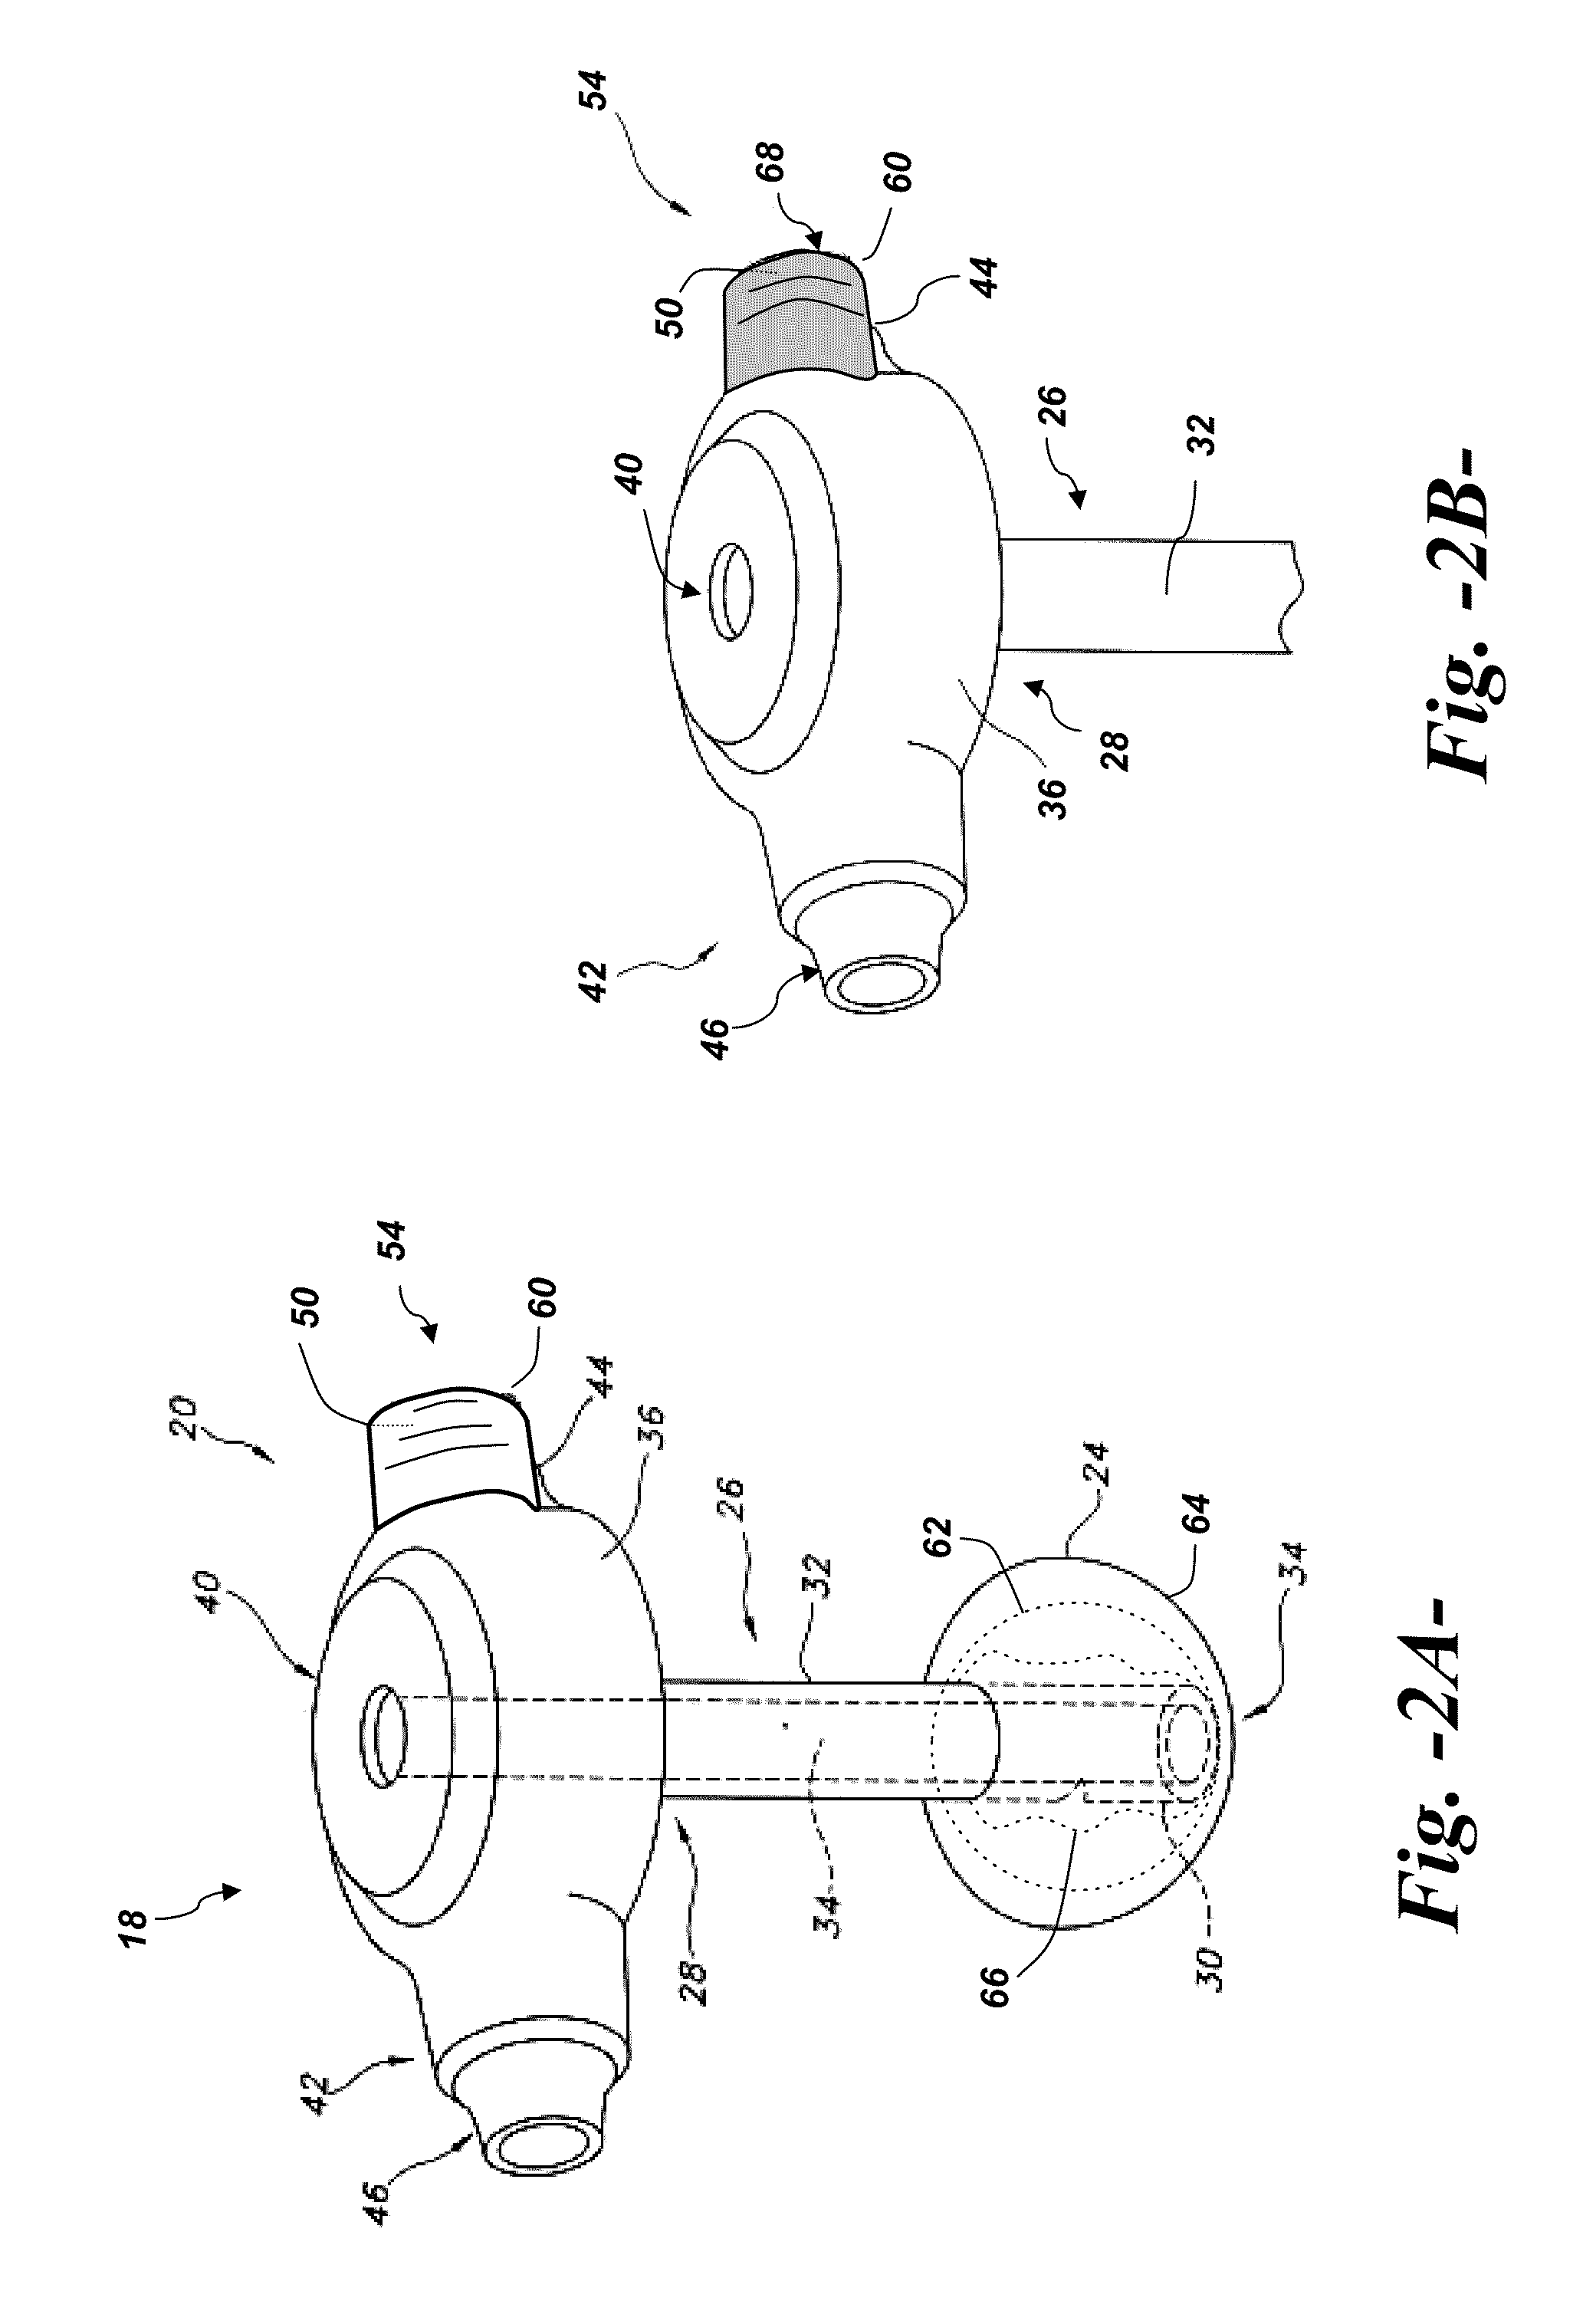 Enteral feeding catheter device with an indicator